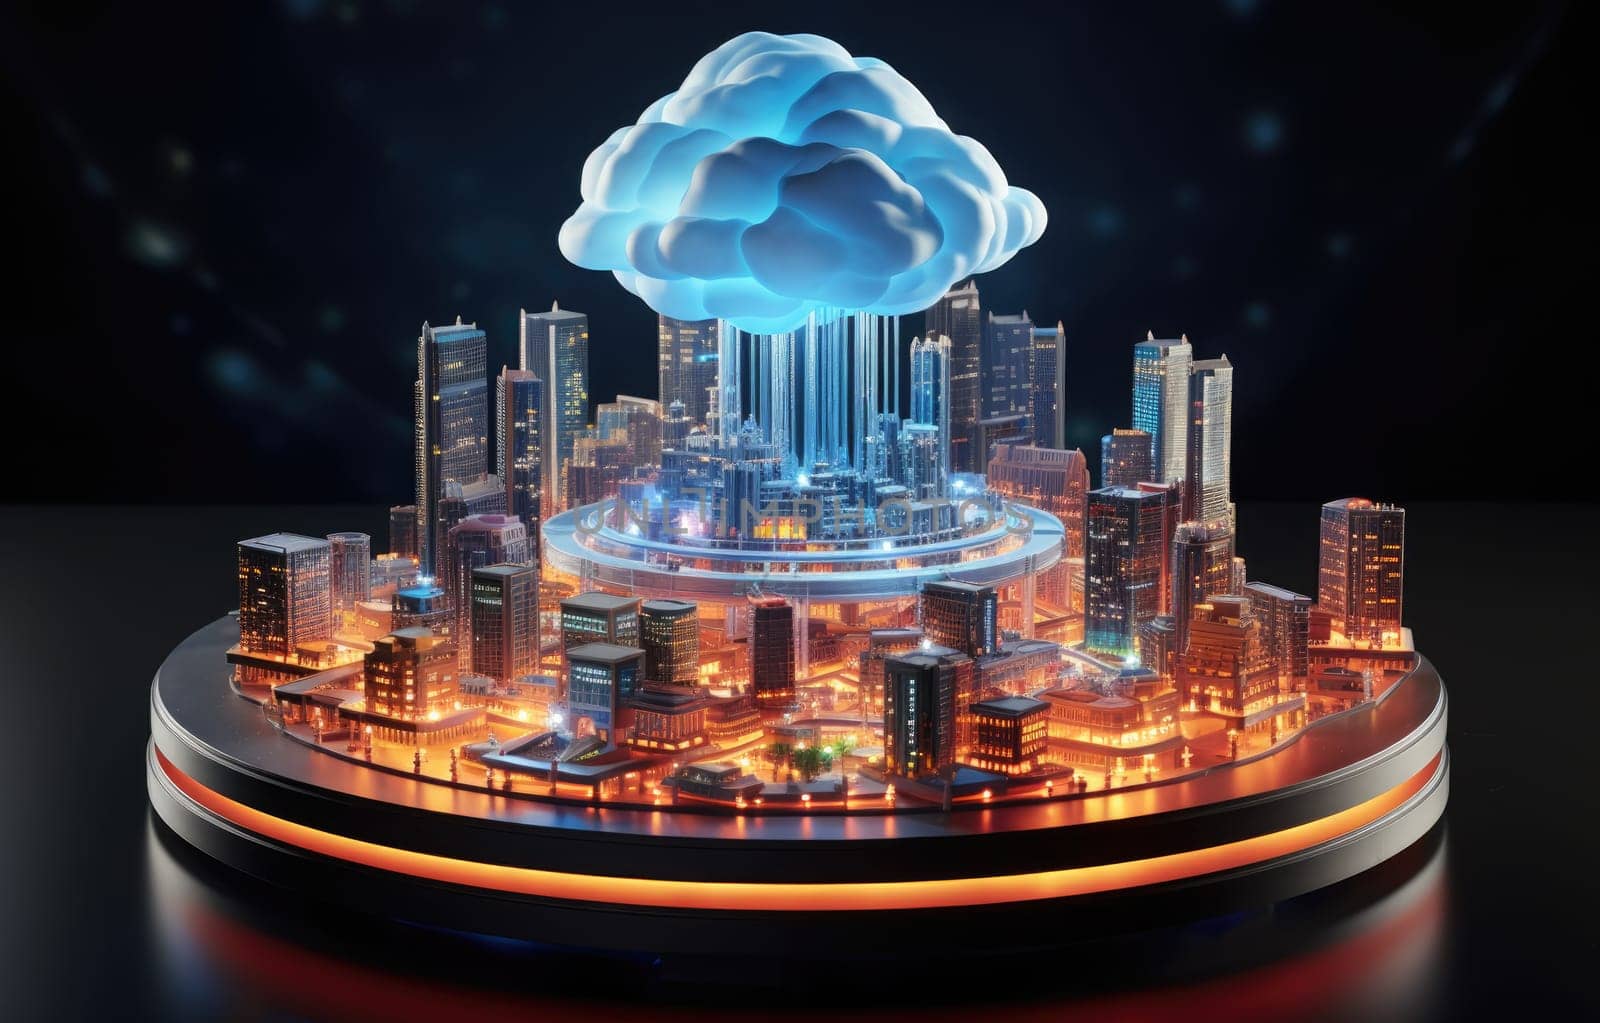 Cloud computing concept. Smart city wireless internet communication with cloud storage, cloud services. Download, upload data on server. by PeaceYAY